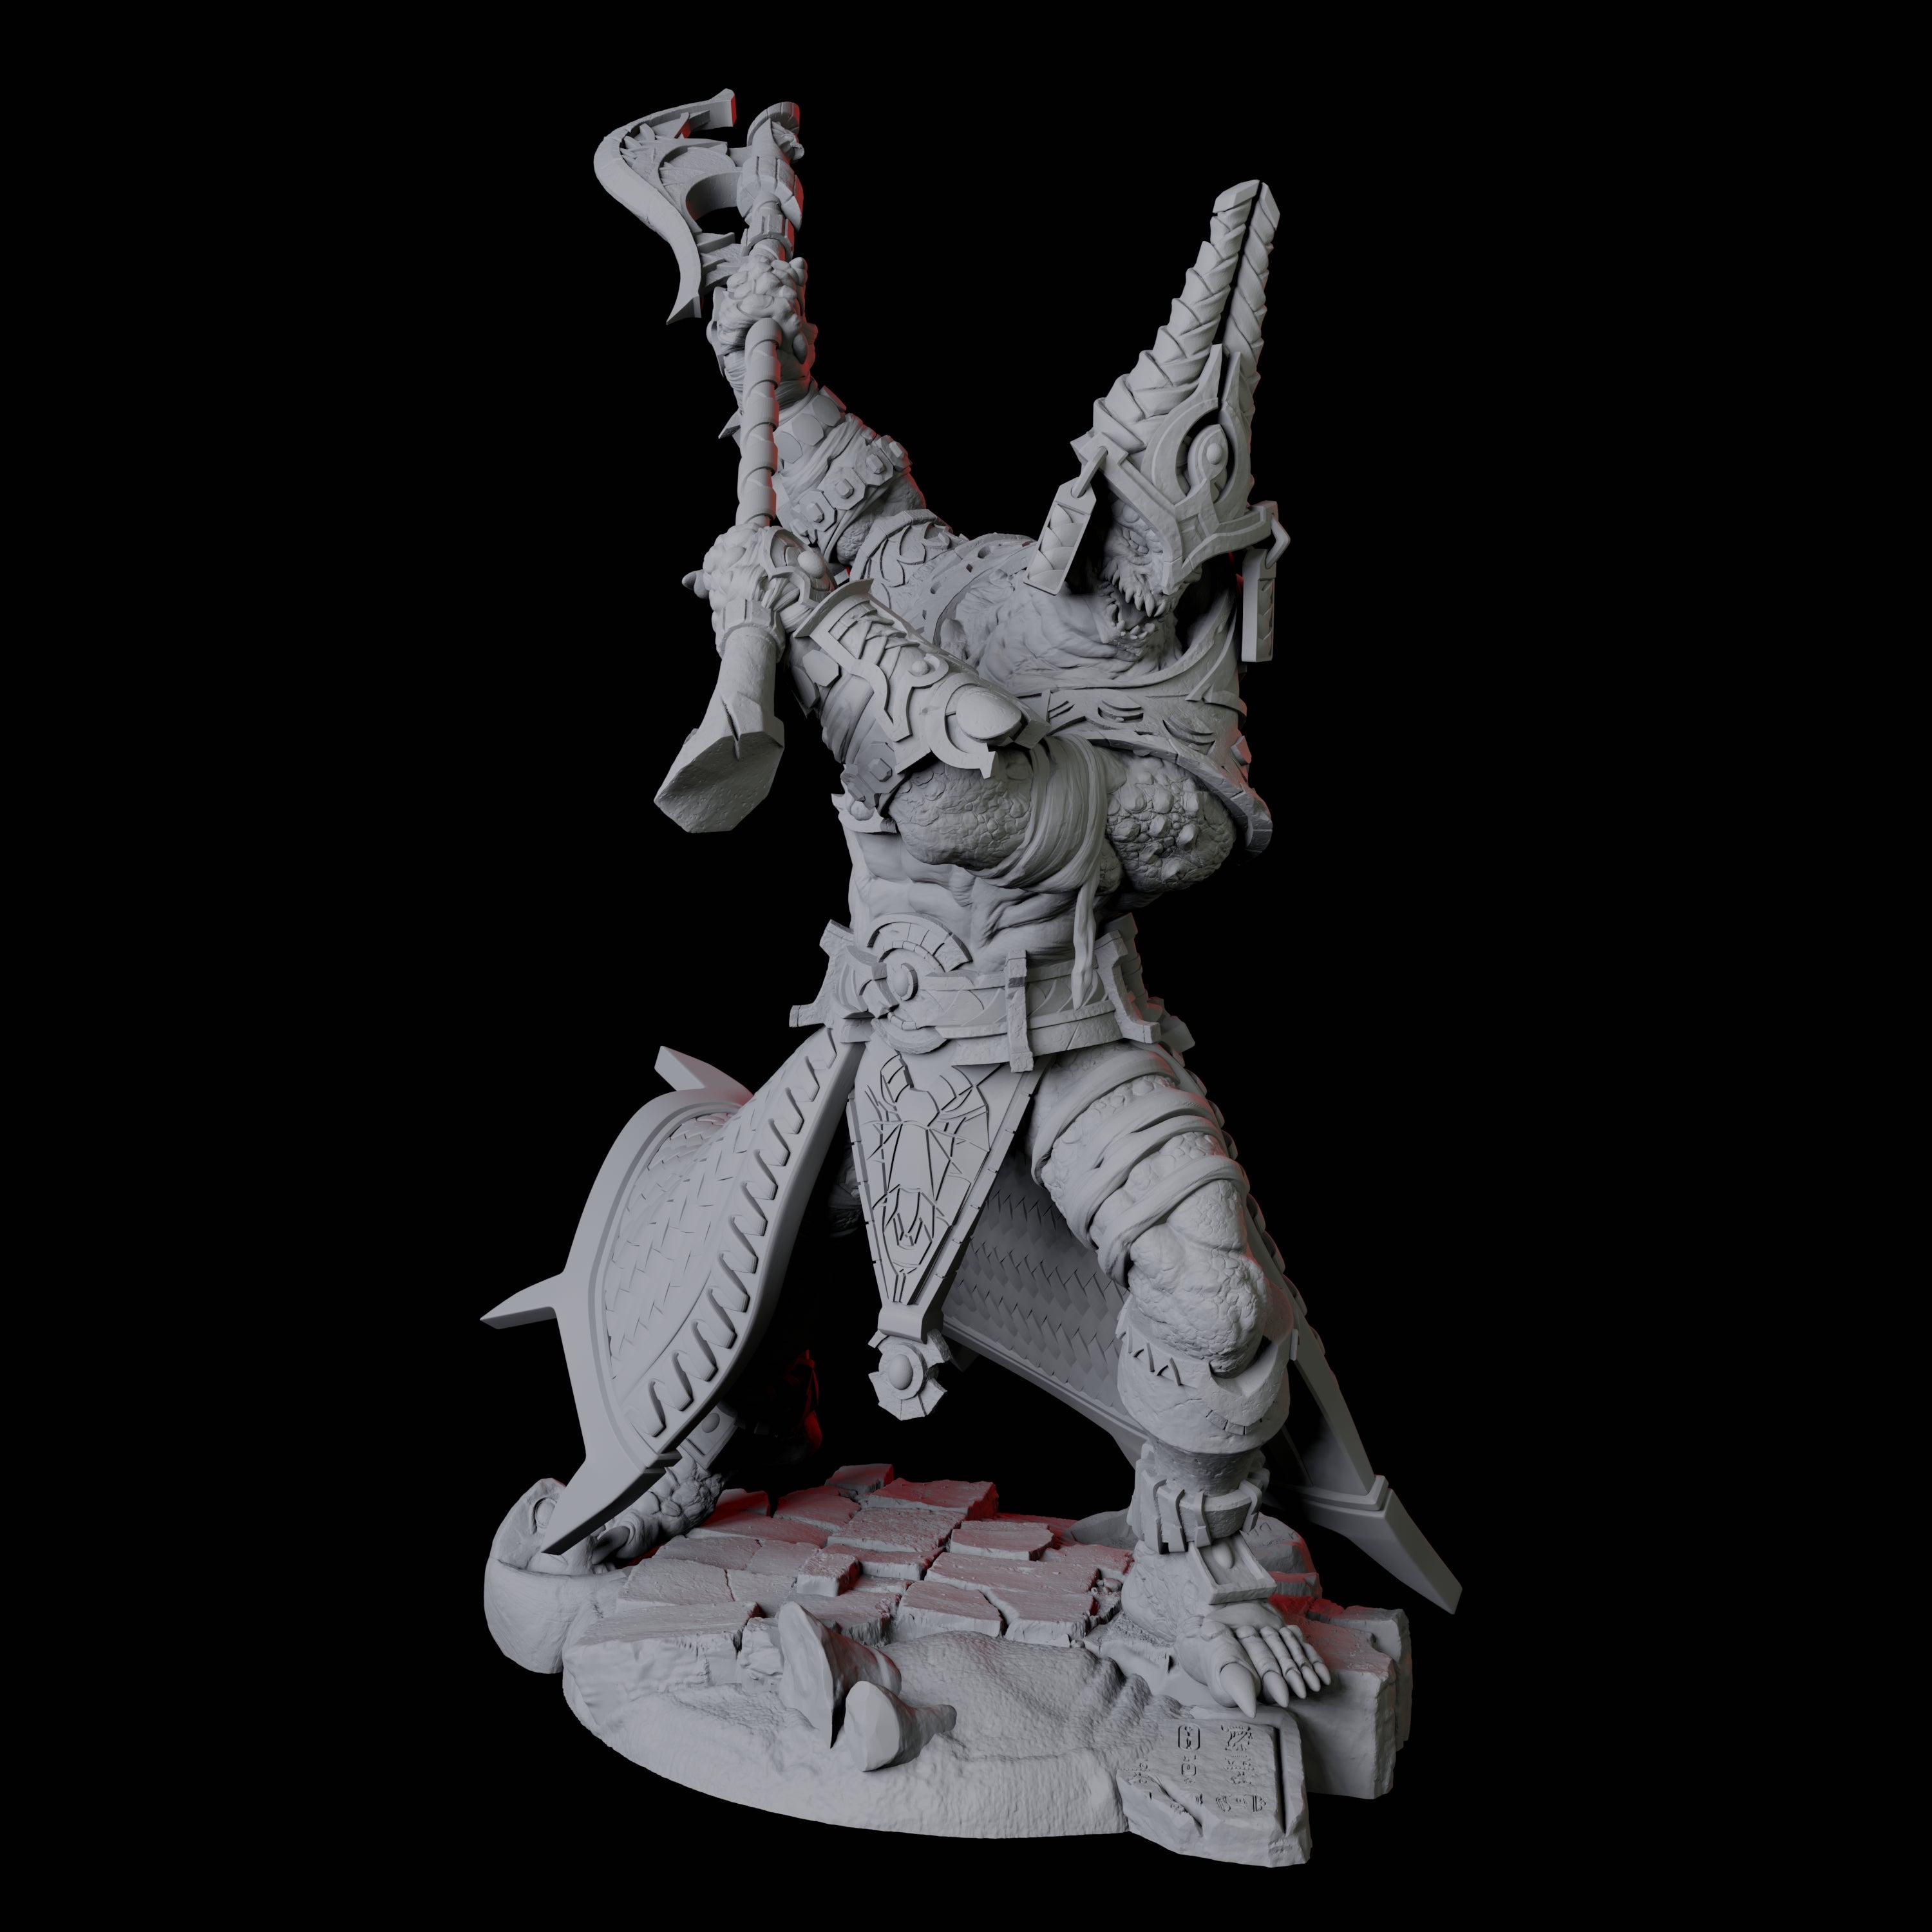 Four Saurian War Priests Miniature for Dungeons and Dragons, Pathfinder or other TTRPGs